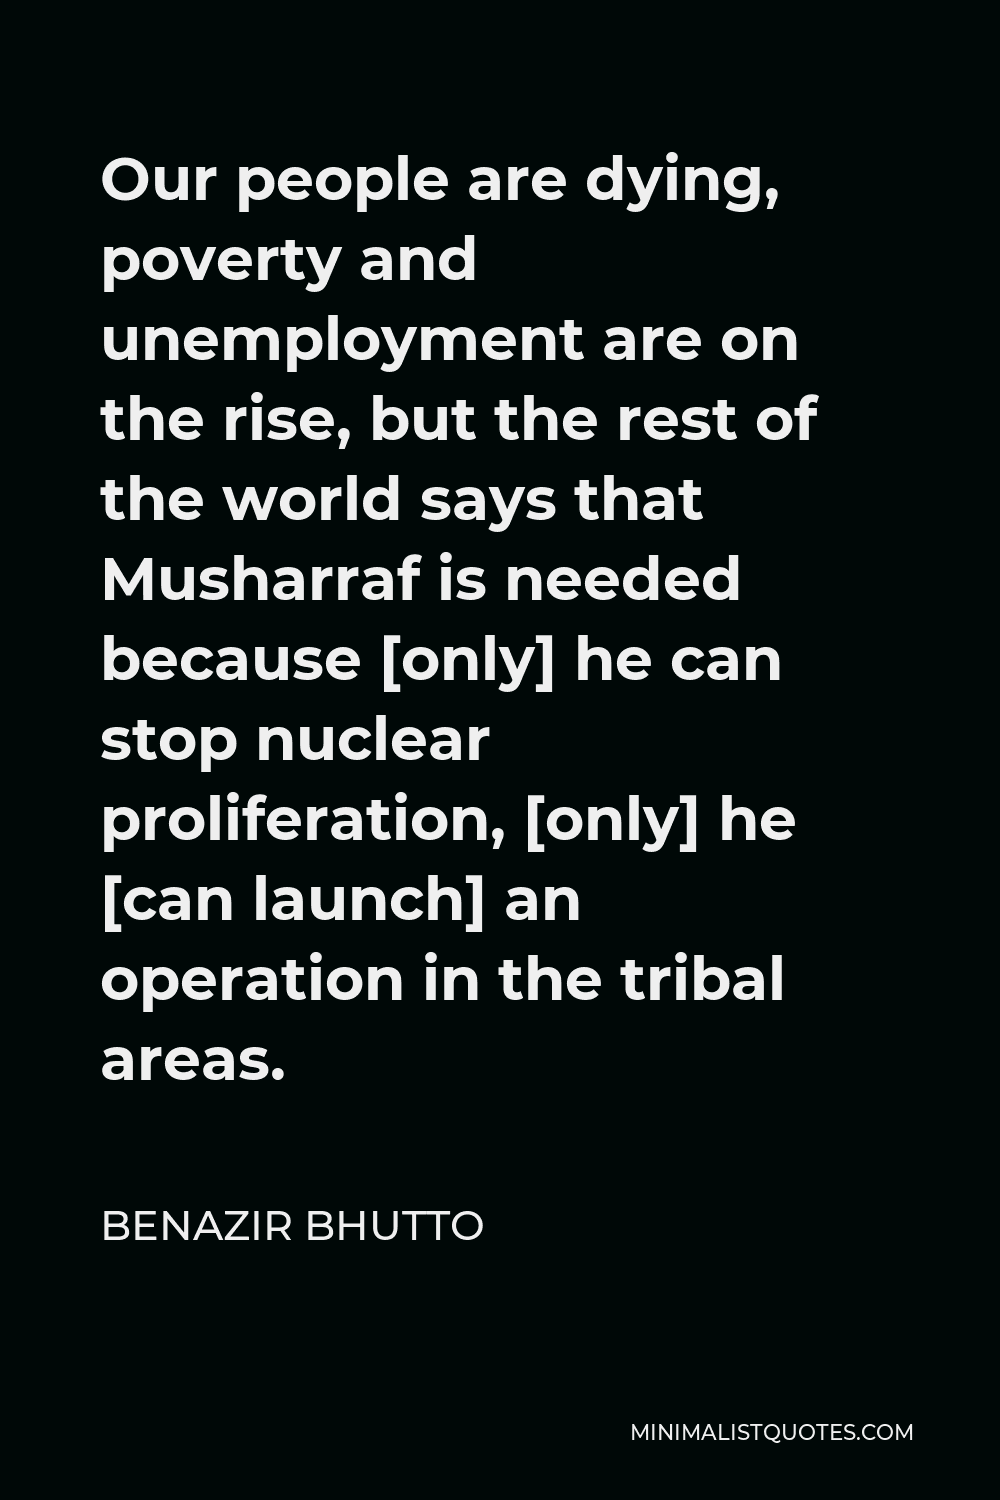 Benazir Bhutto Quote - Our people are dying, poverty and unemployment are on the rise, but the rest of the world says that Musharraf is needed because [only] he can stop nuclear proliferation, [only] he [can launch] an operation in the tribal areas.